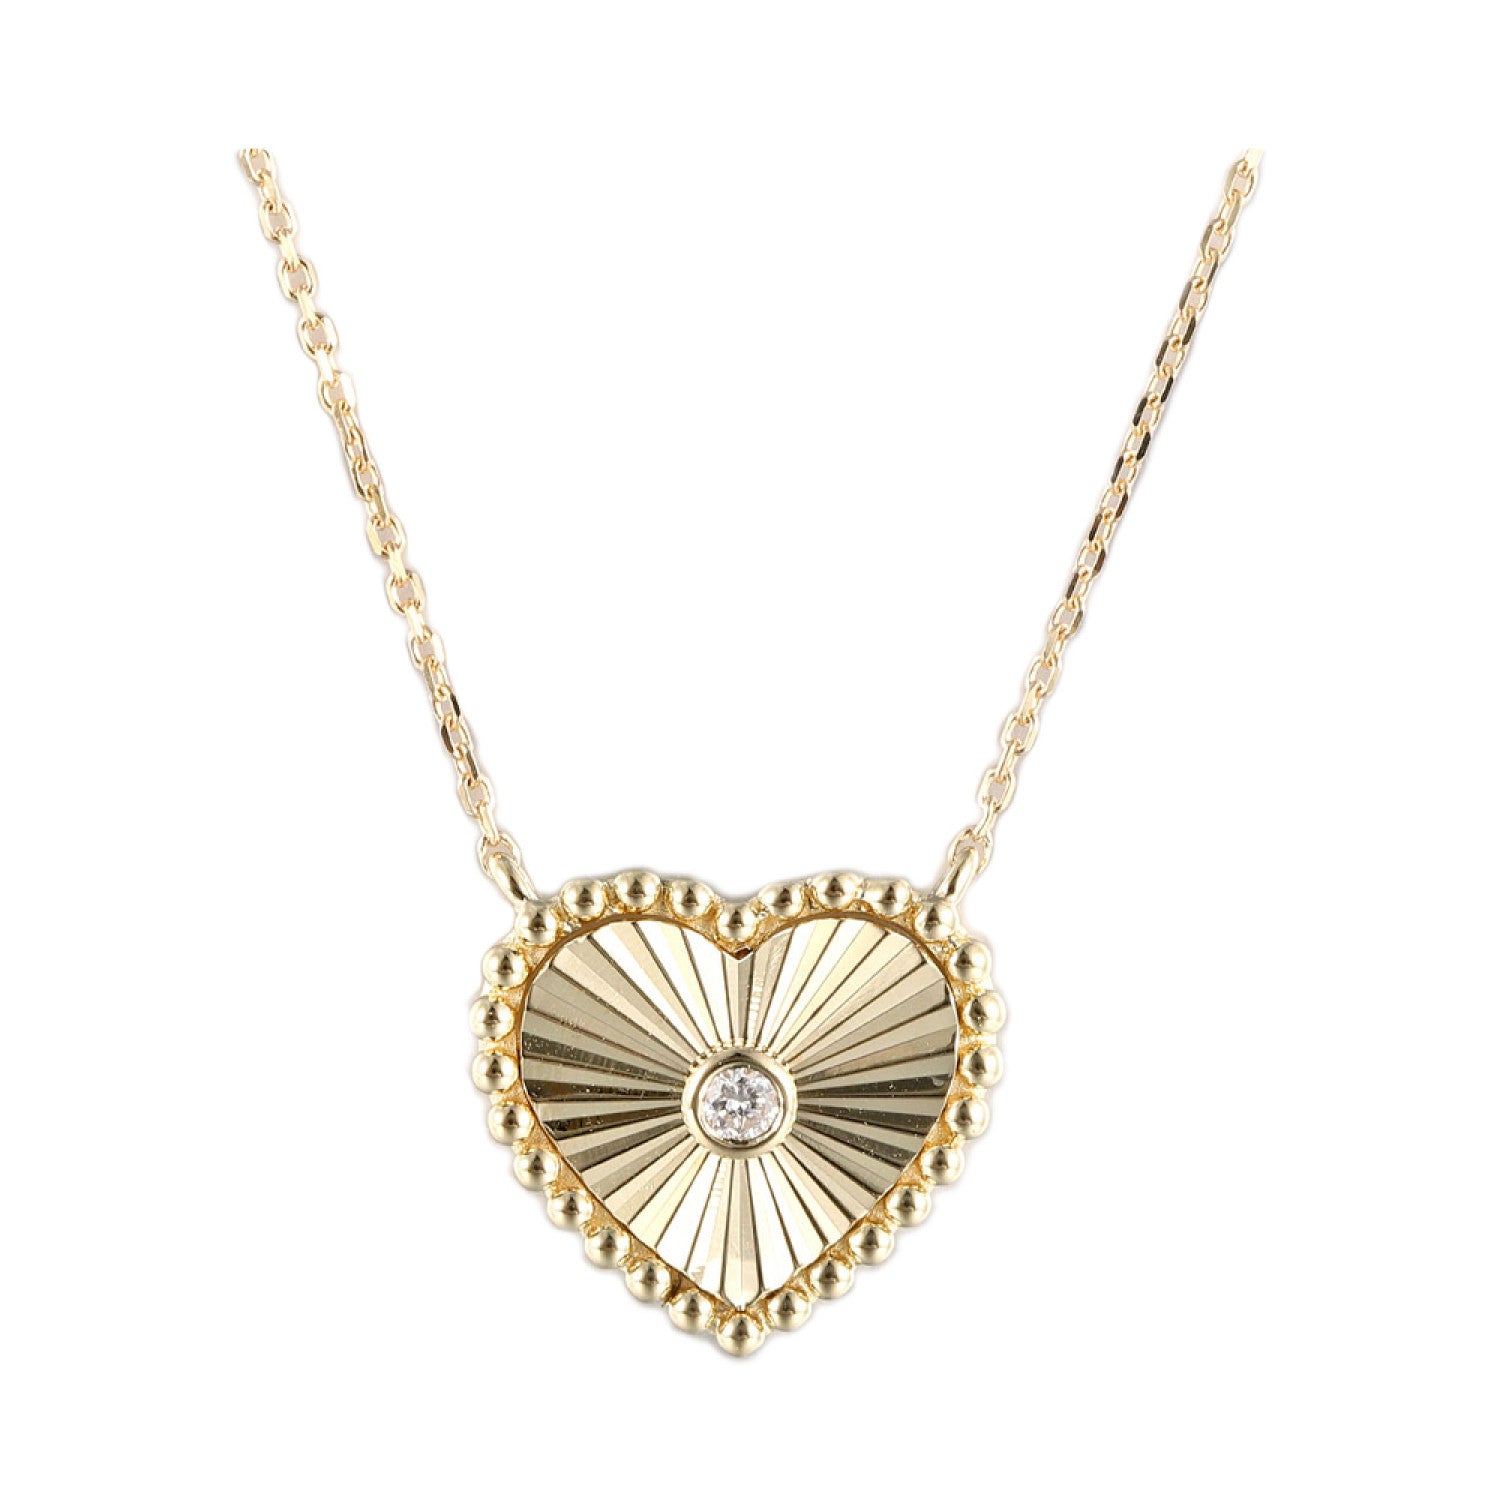 10K Yellow Gold Heart Pendant with Diamond Accent